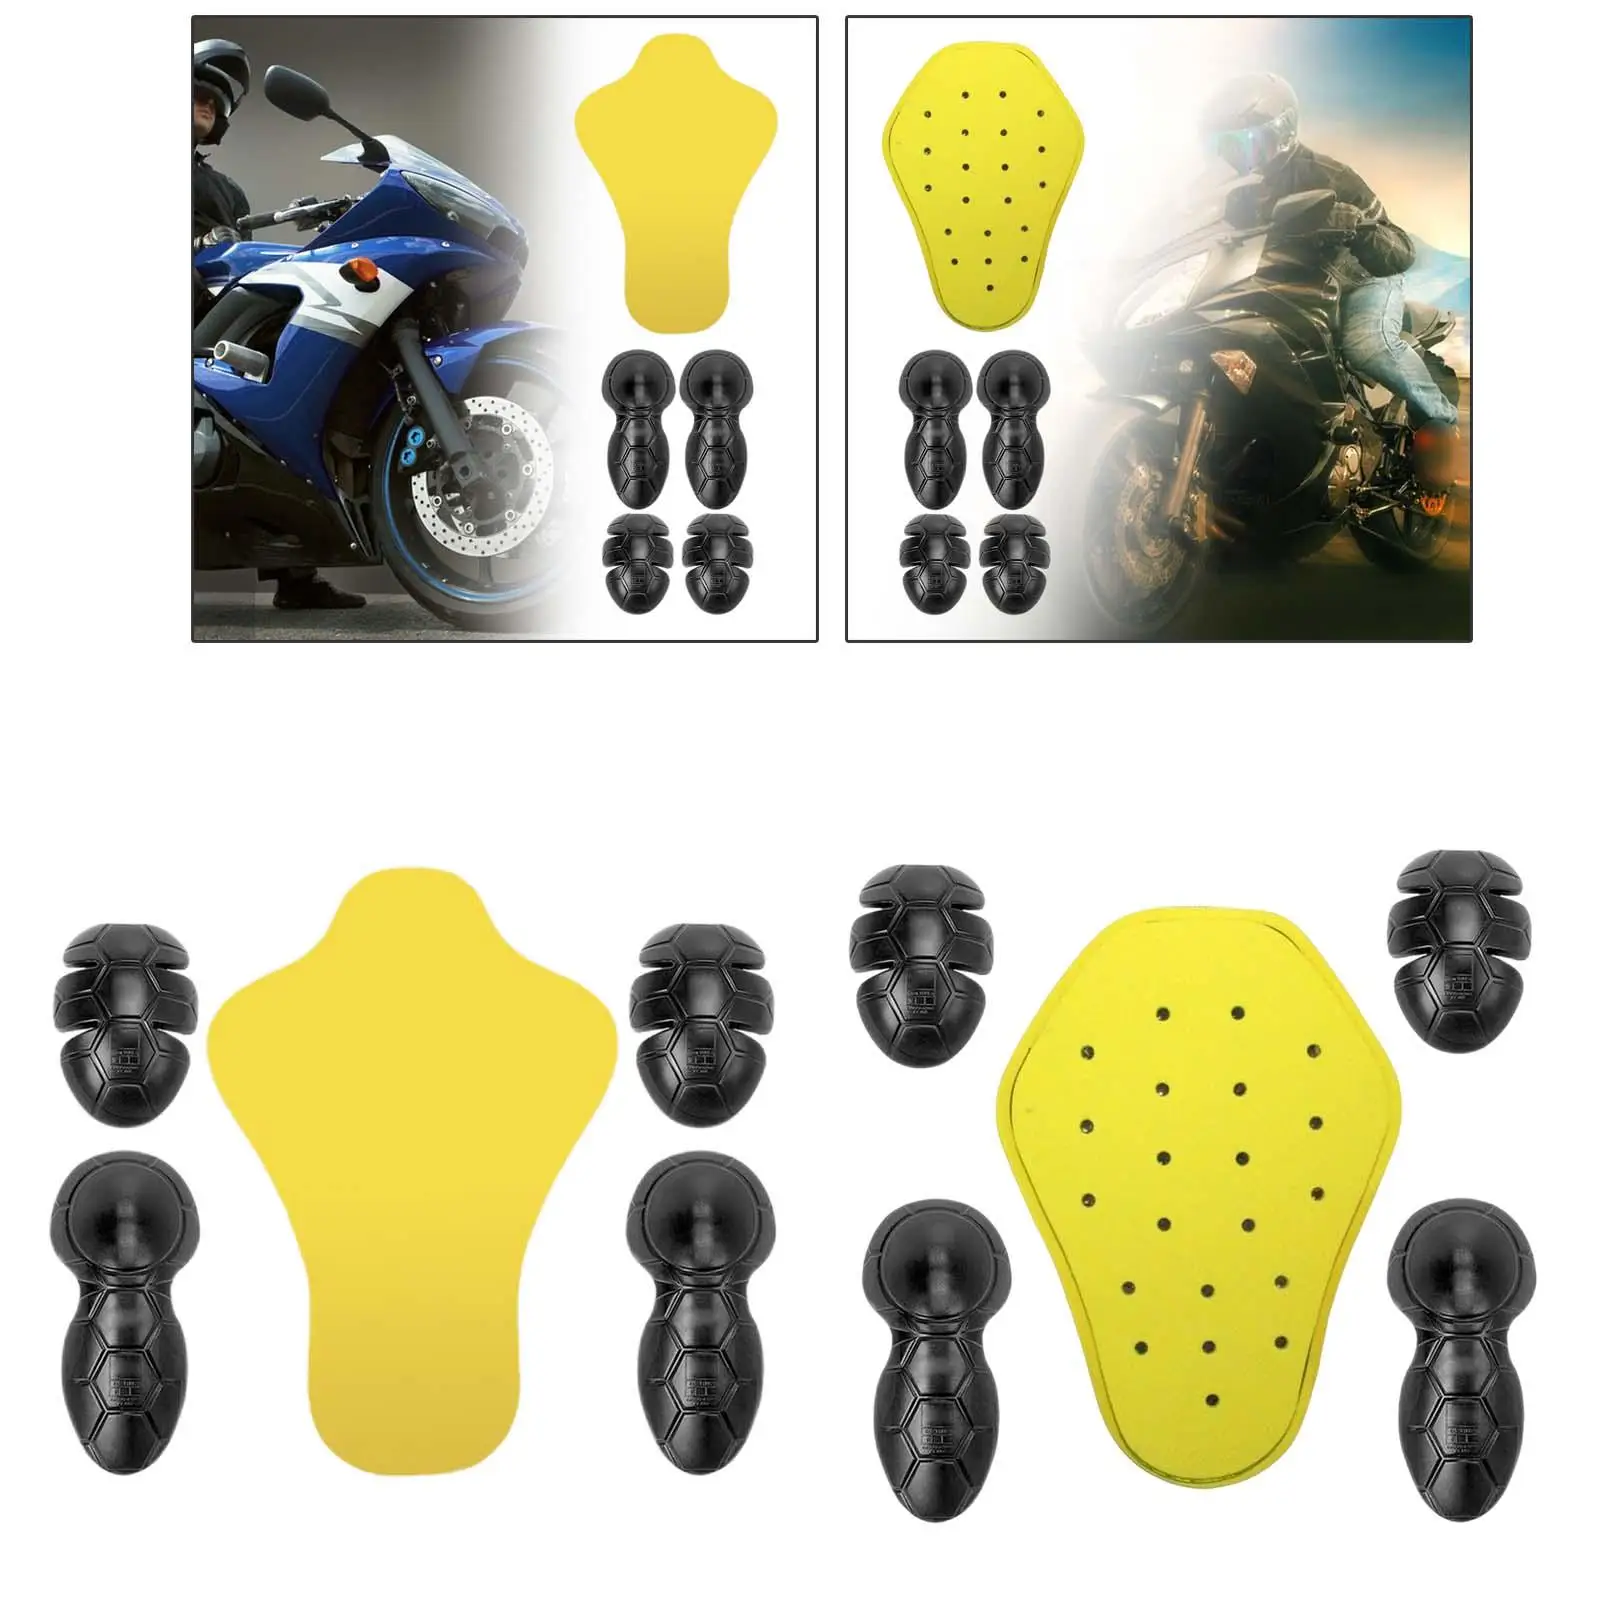 5x Motorcycle Armour Set Shoulder Knee Back Pad Breathable Jacket Inserts